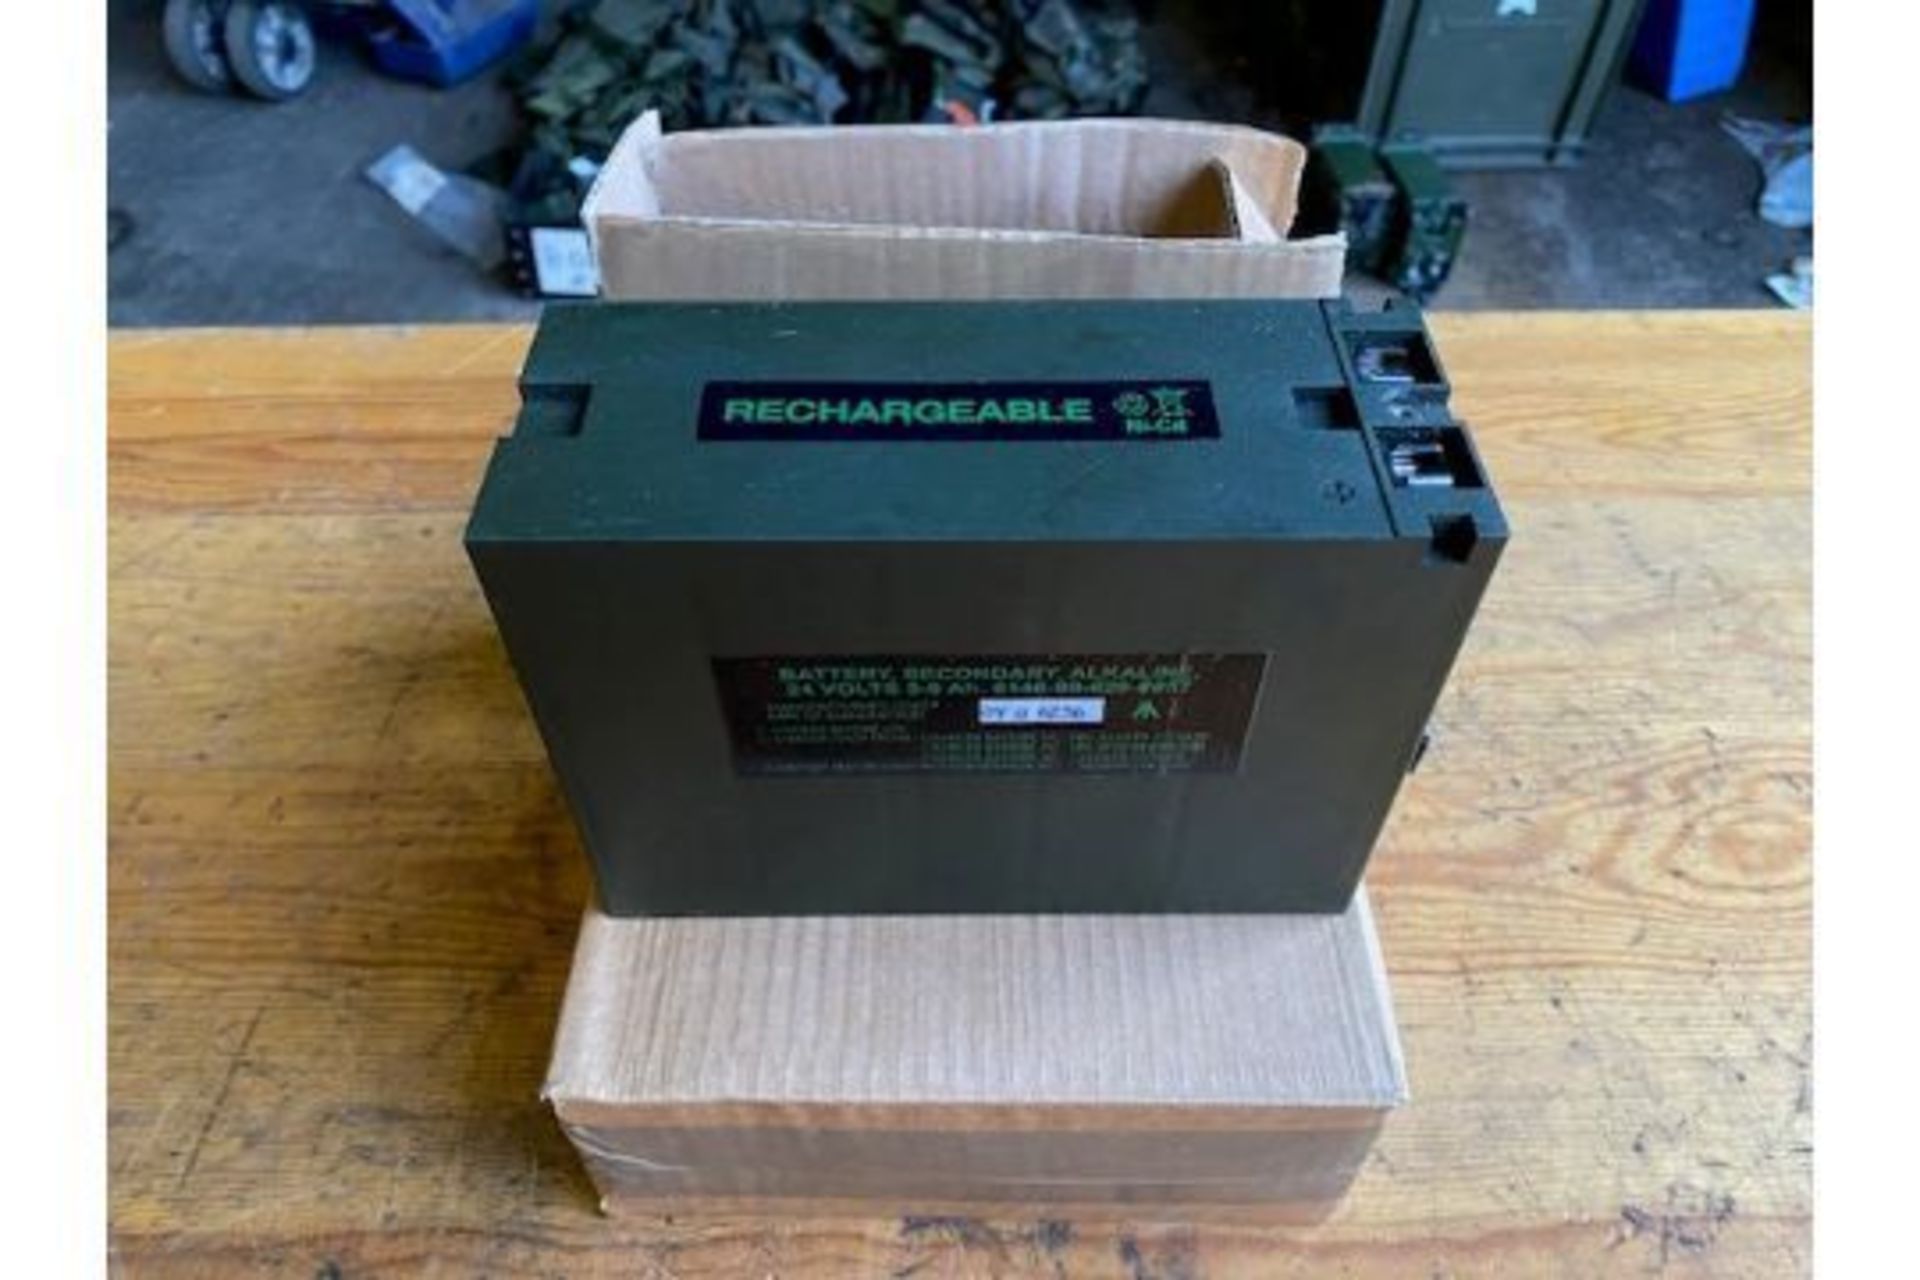 2 x New Unissued Clansman 24V Rechargeable Battery Original Packing